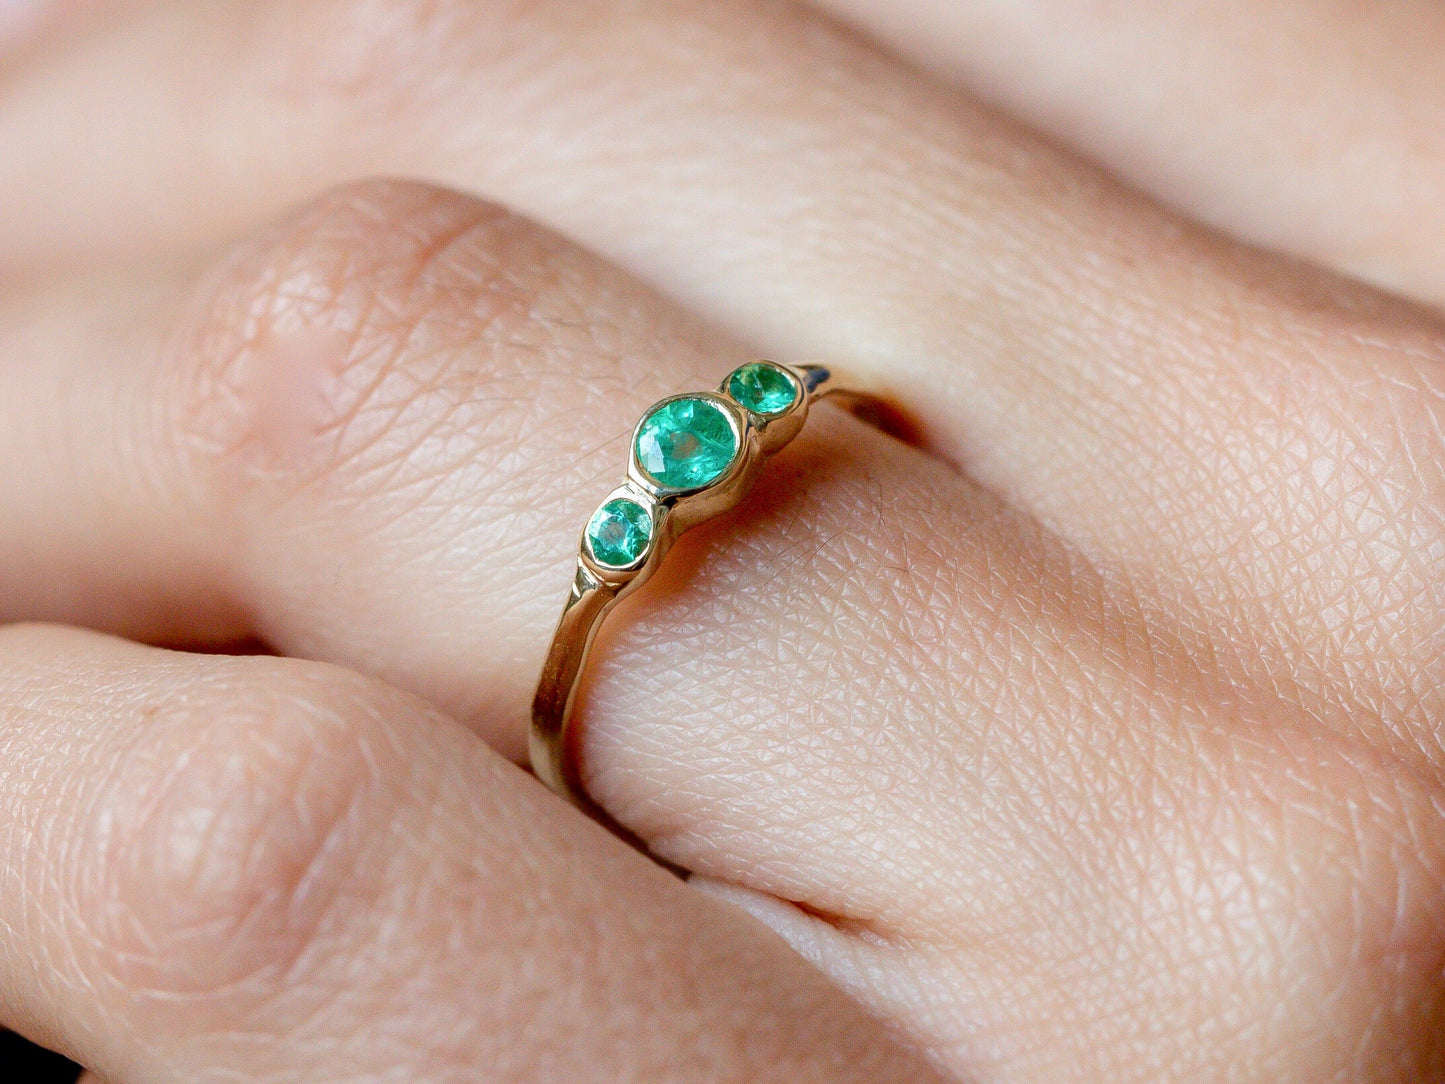 The Emerald Queen Ring